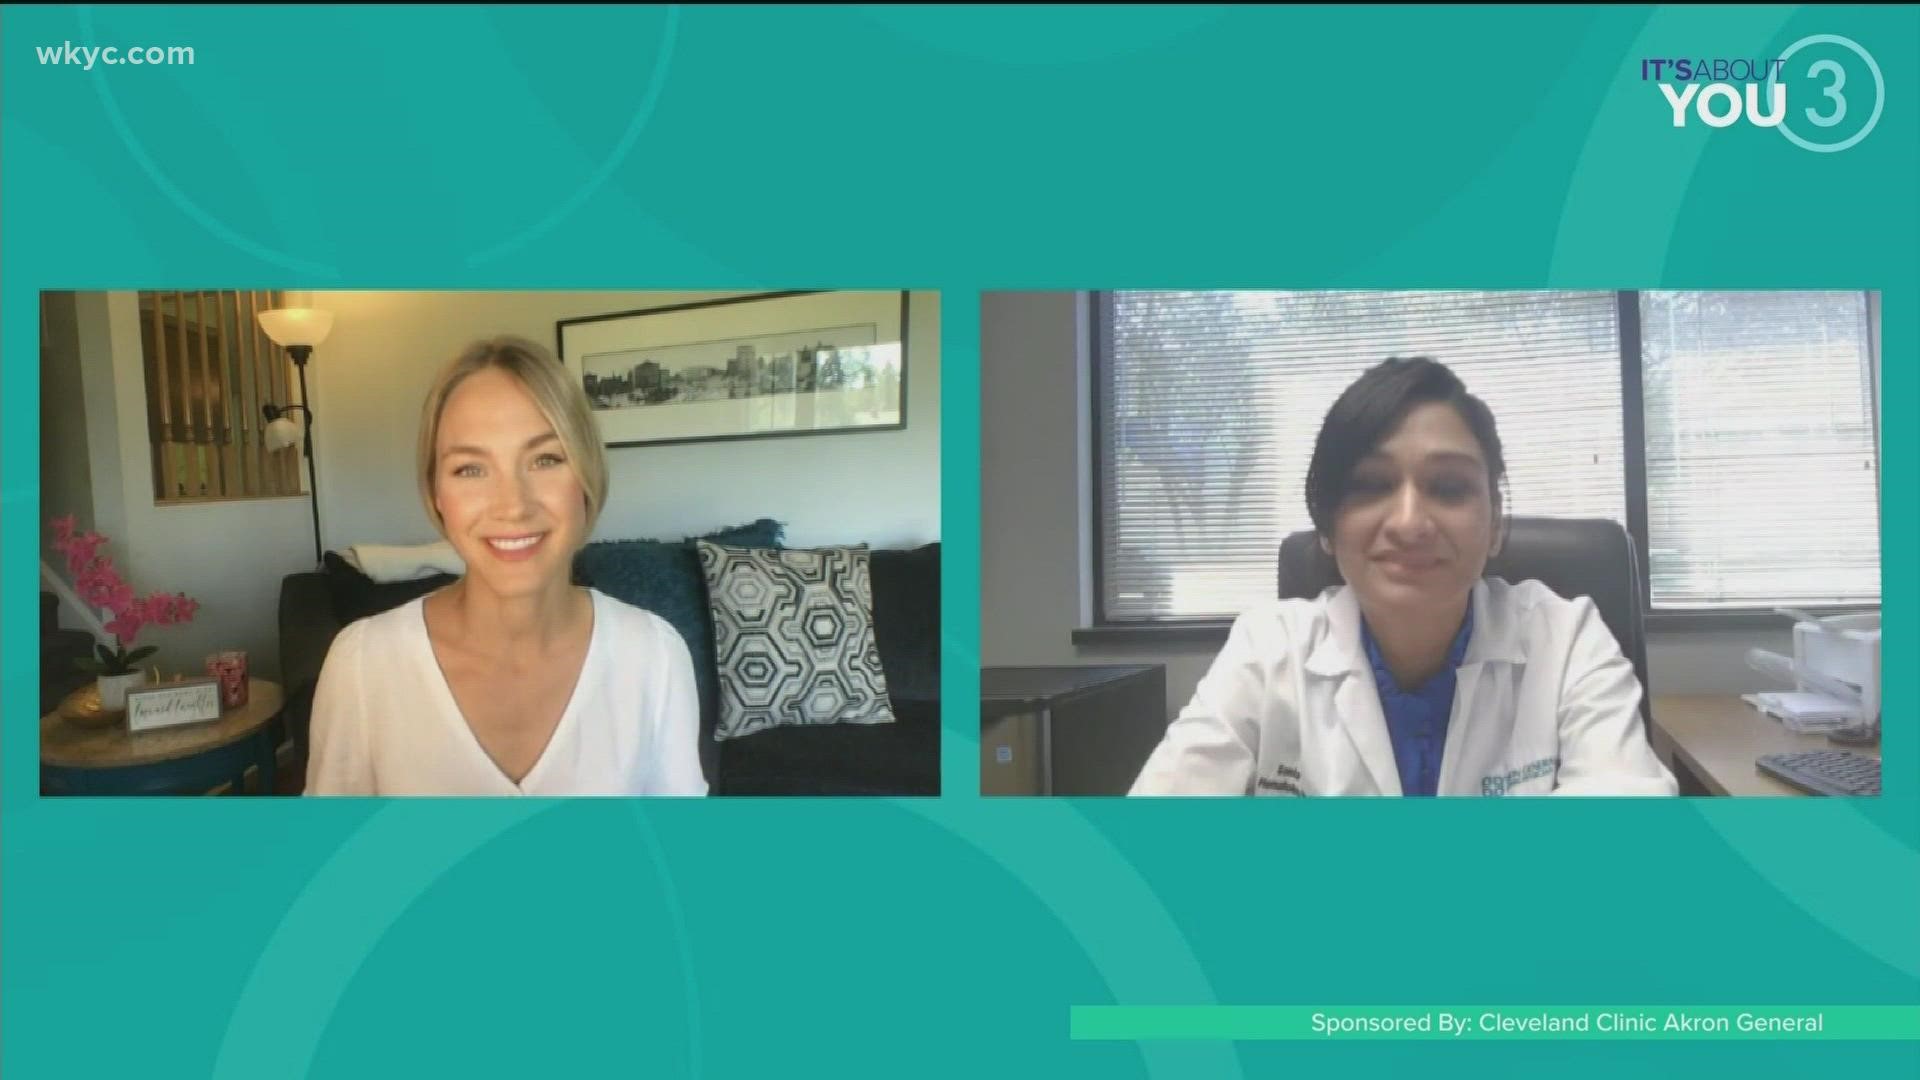 Alexa talks with Dr. Sonia Sandhu, MD, from Cleveland Clinic Akron General, about how important it is to be proactive when it comes to catching and stopping cancer.